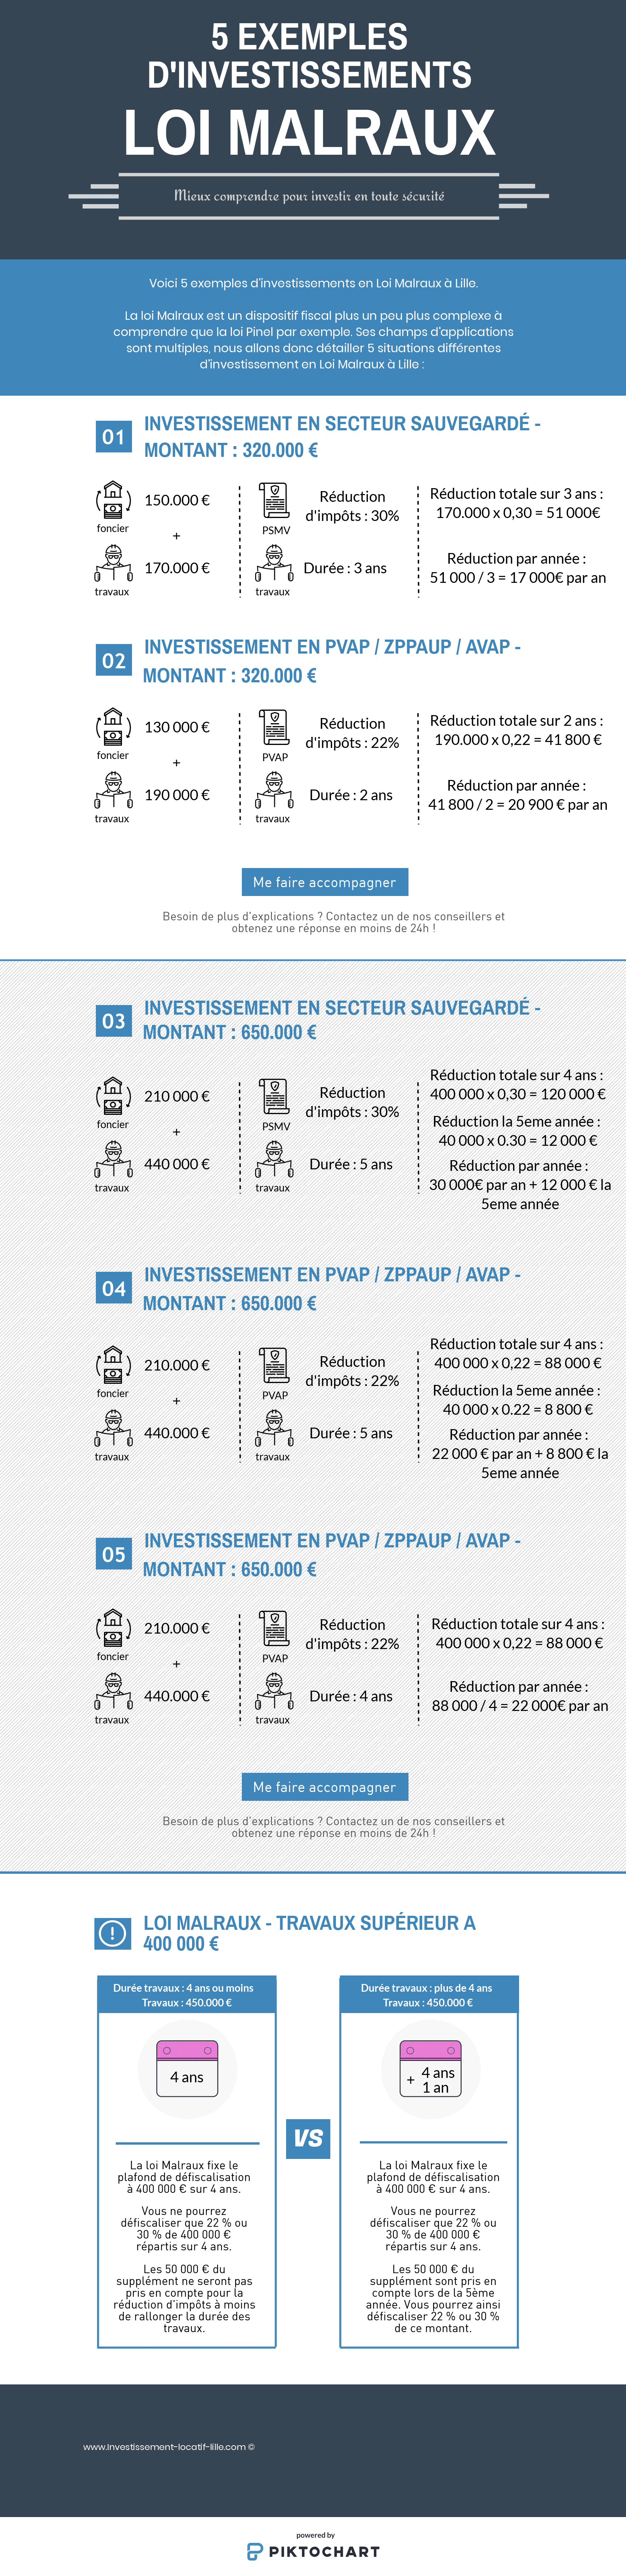 infographie loi malraux exemple loi malraux lille